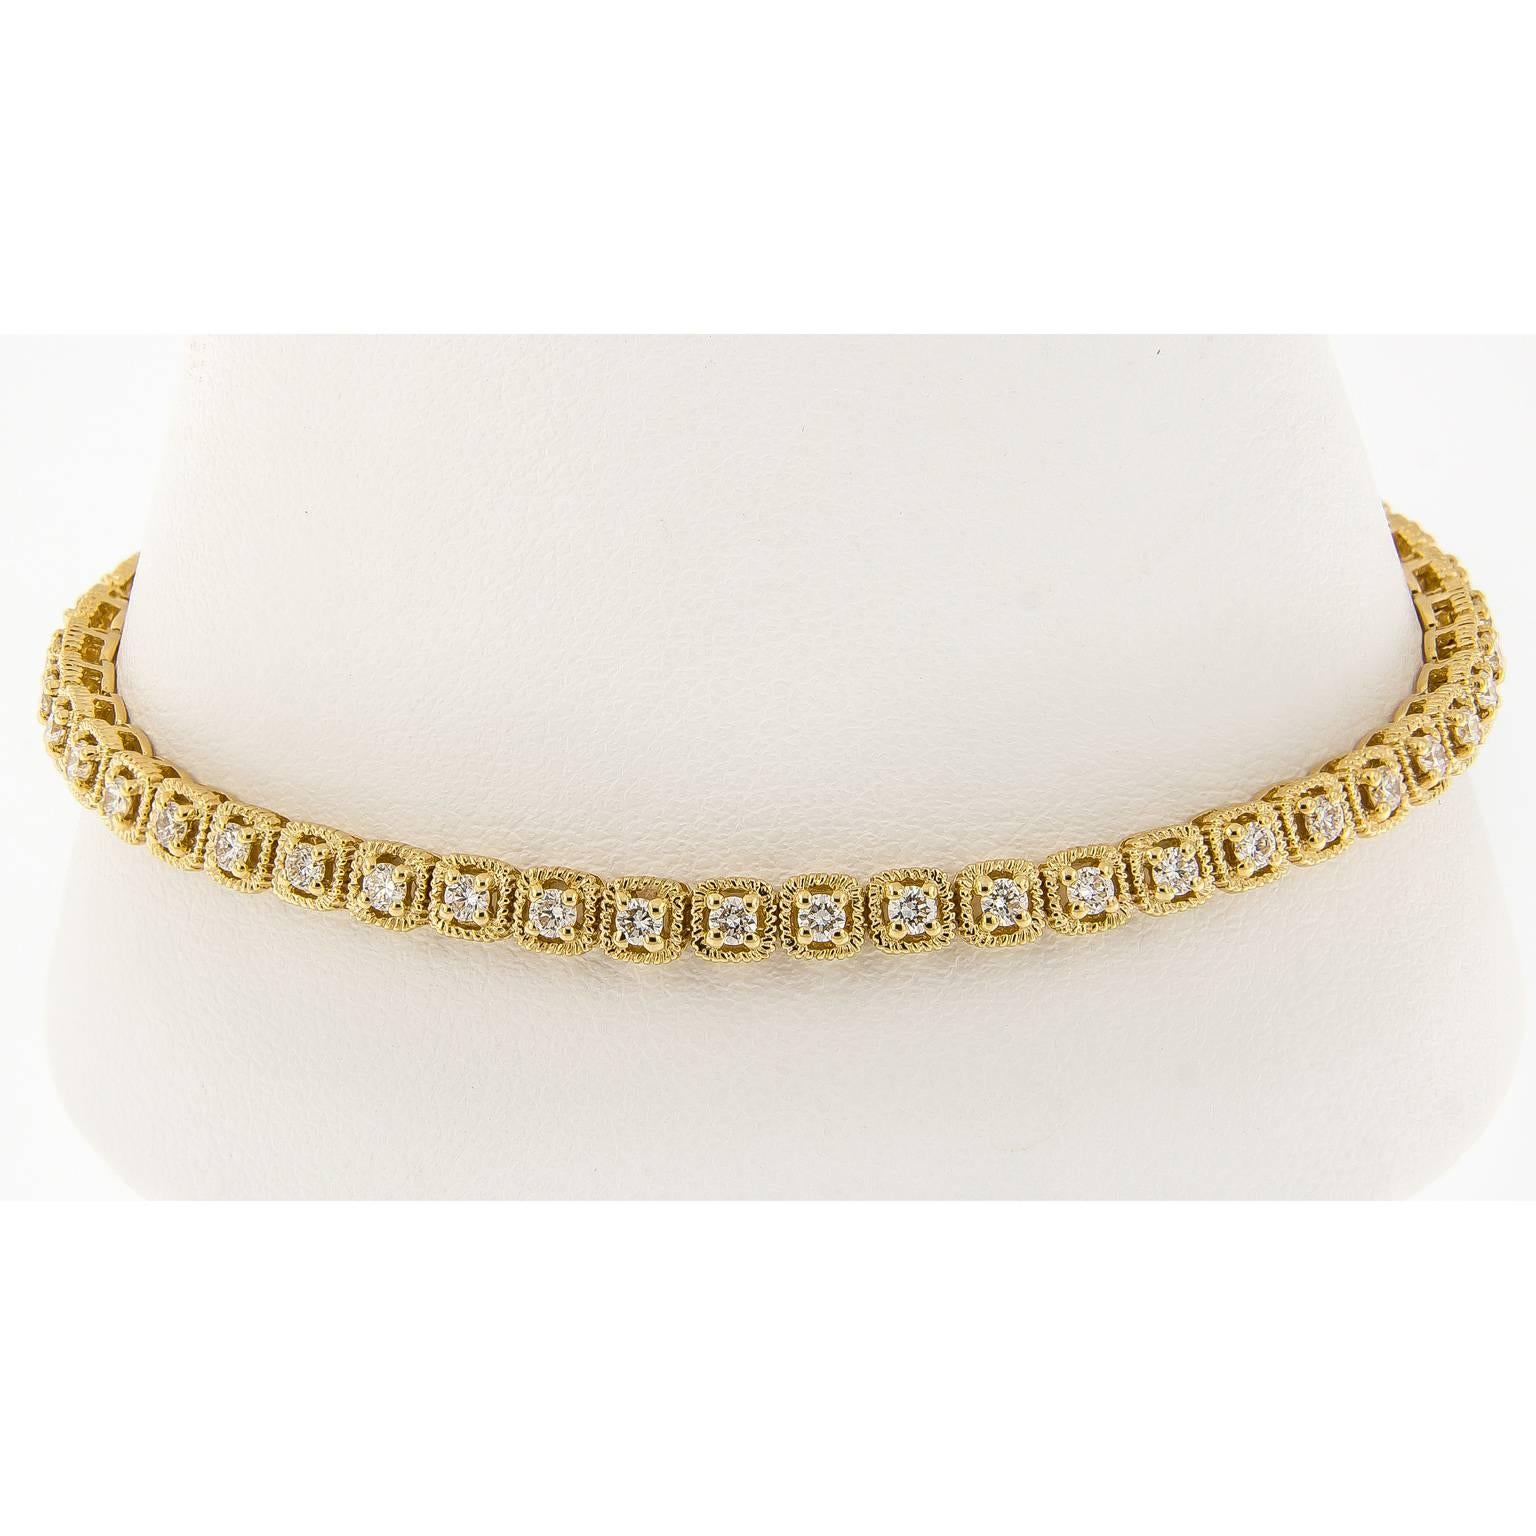 This on-trend design brings a contemporary twist to the classic tennis bracelet. Bracelet is executed in 18k yellow gold and has a unique link design, accented with prong set diamonds. She can wear one, two or more bolo designs together to create a